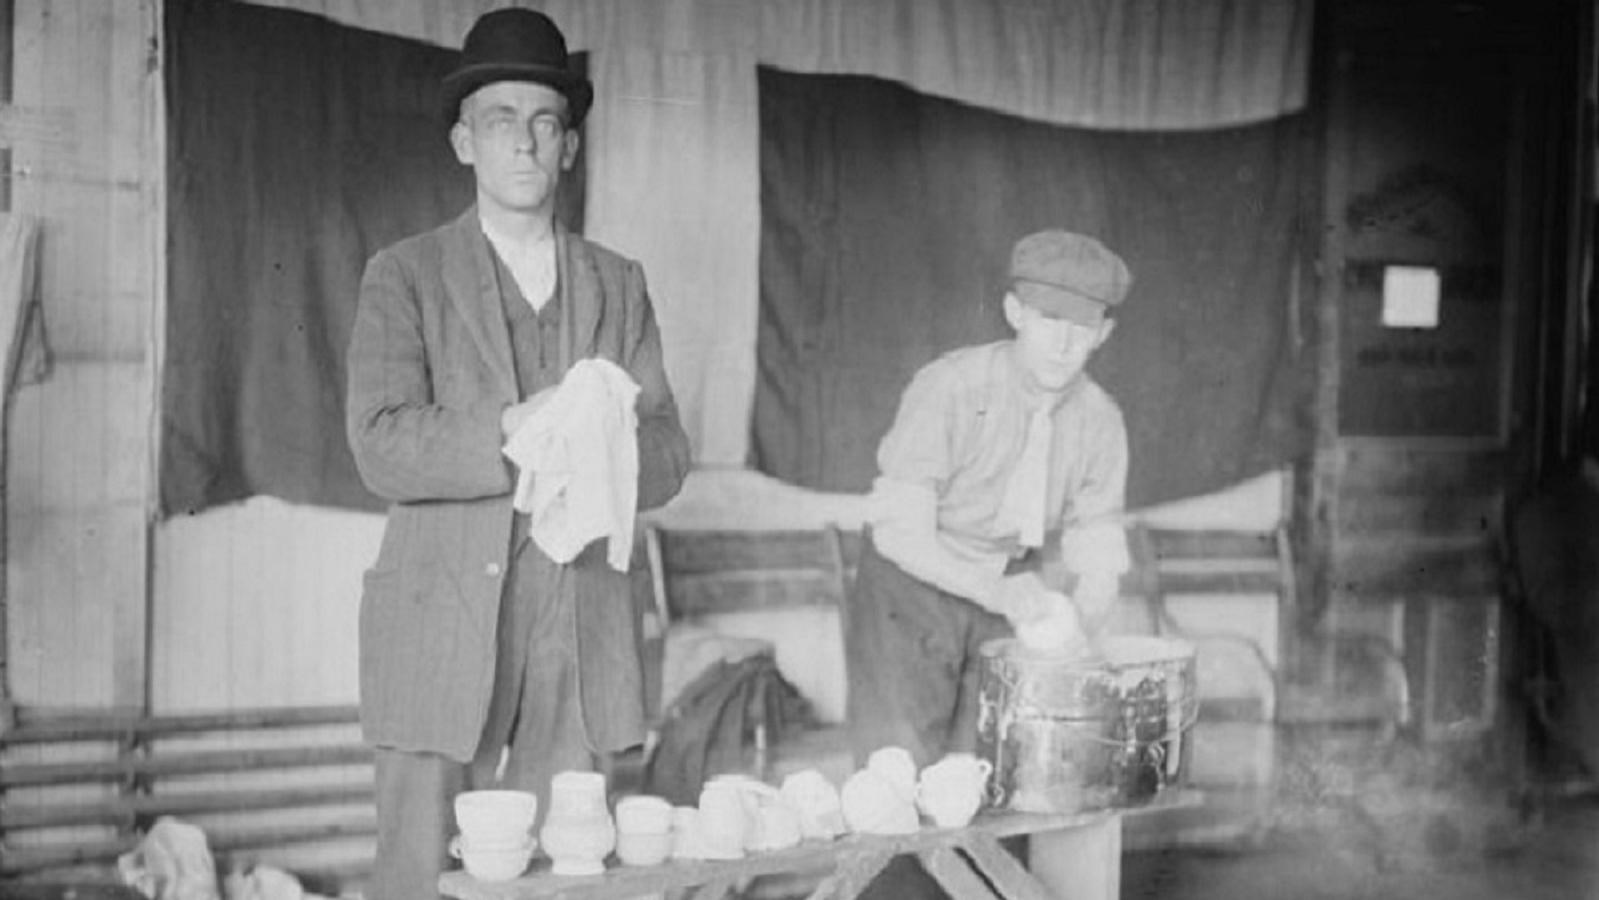 Black and white photo of two men washing dishes in a bucket on a crude wooden table behind a kitchen